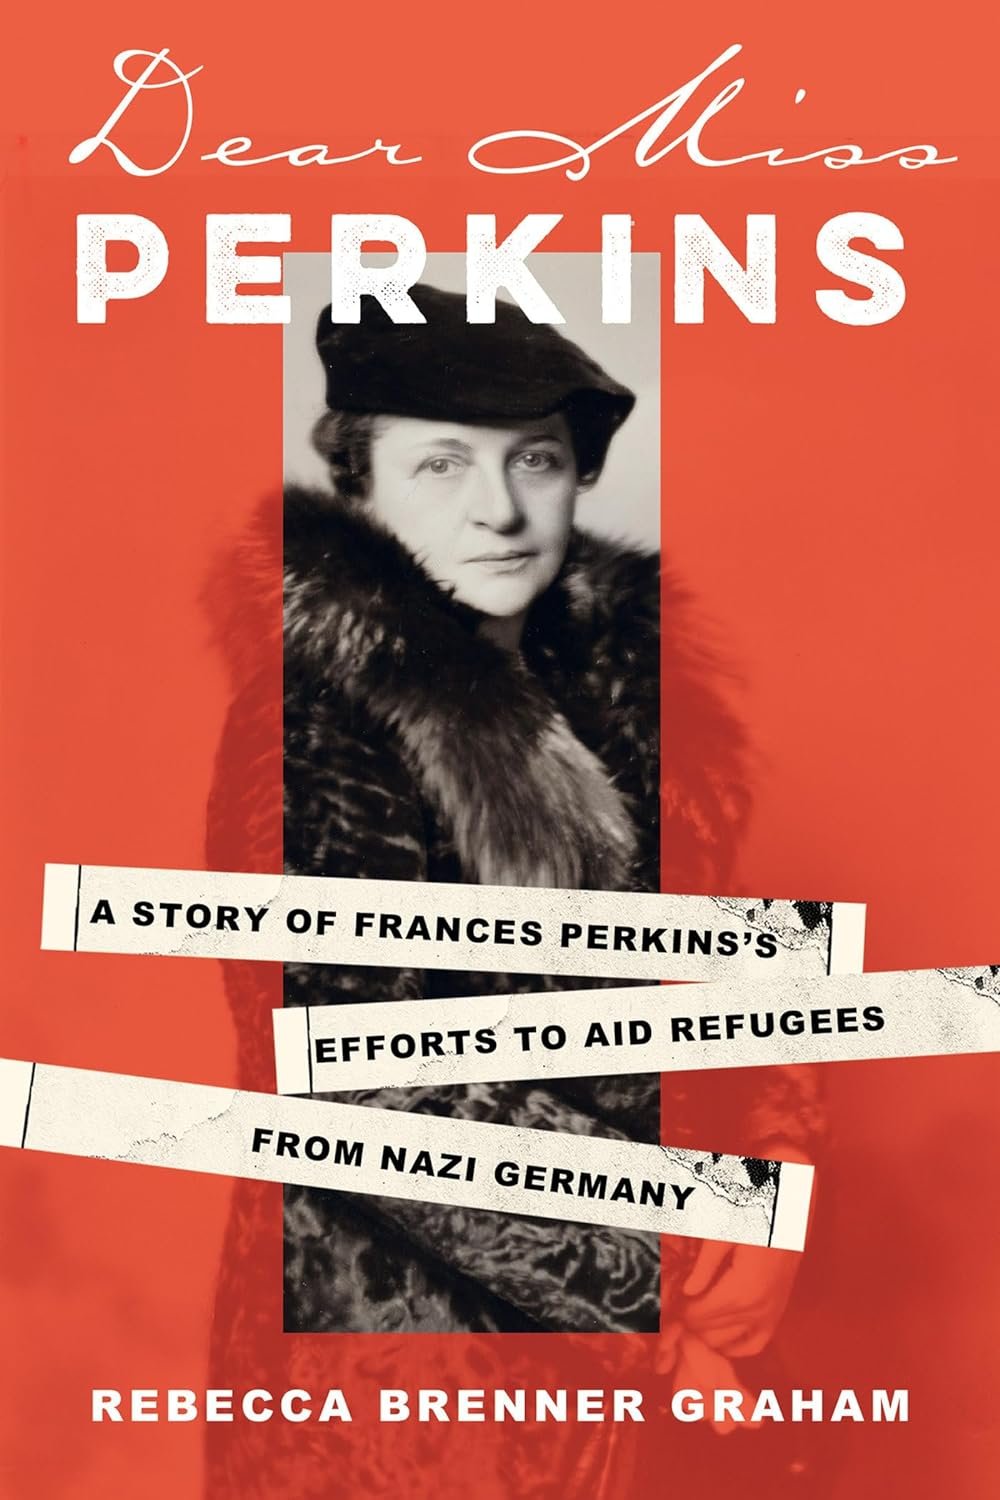 A new narrative of the first woman to serve in a president’s cabinet, reveals the full, never-before-told story of her role in saving Jewish refugees during the Nazi regime.